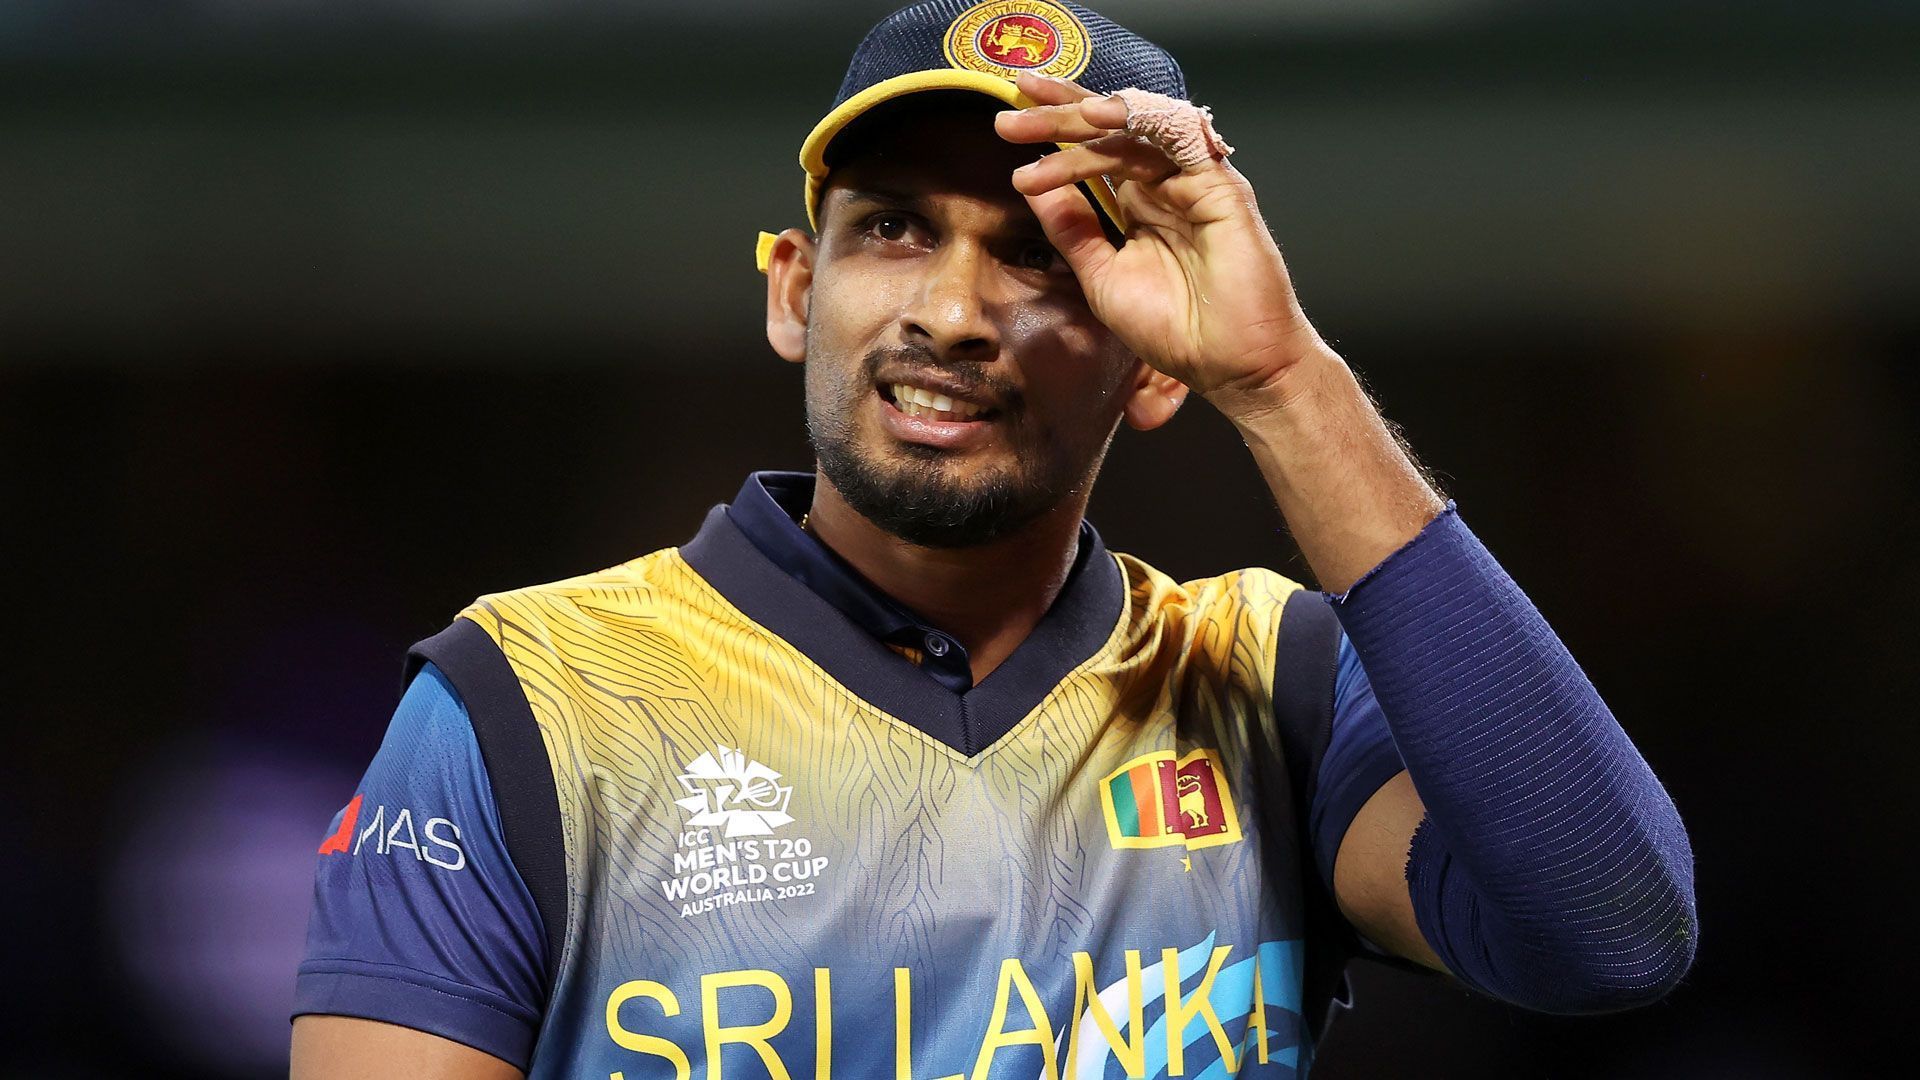 While he has done well with bat and ball, his calm leadership has worked well for Sri Lanka